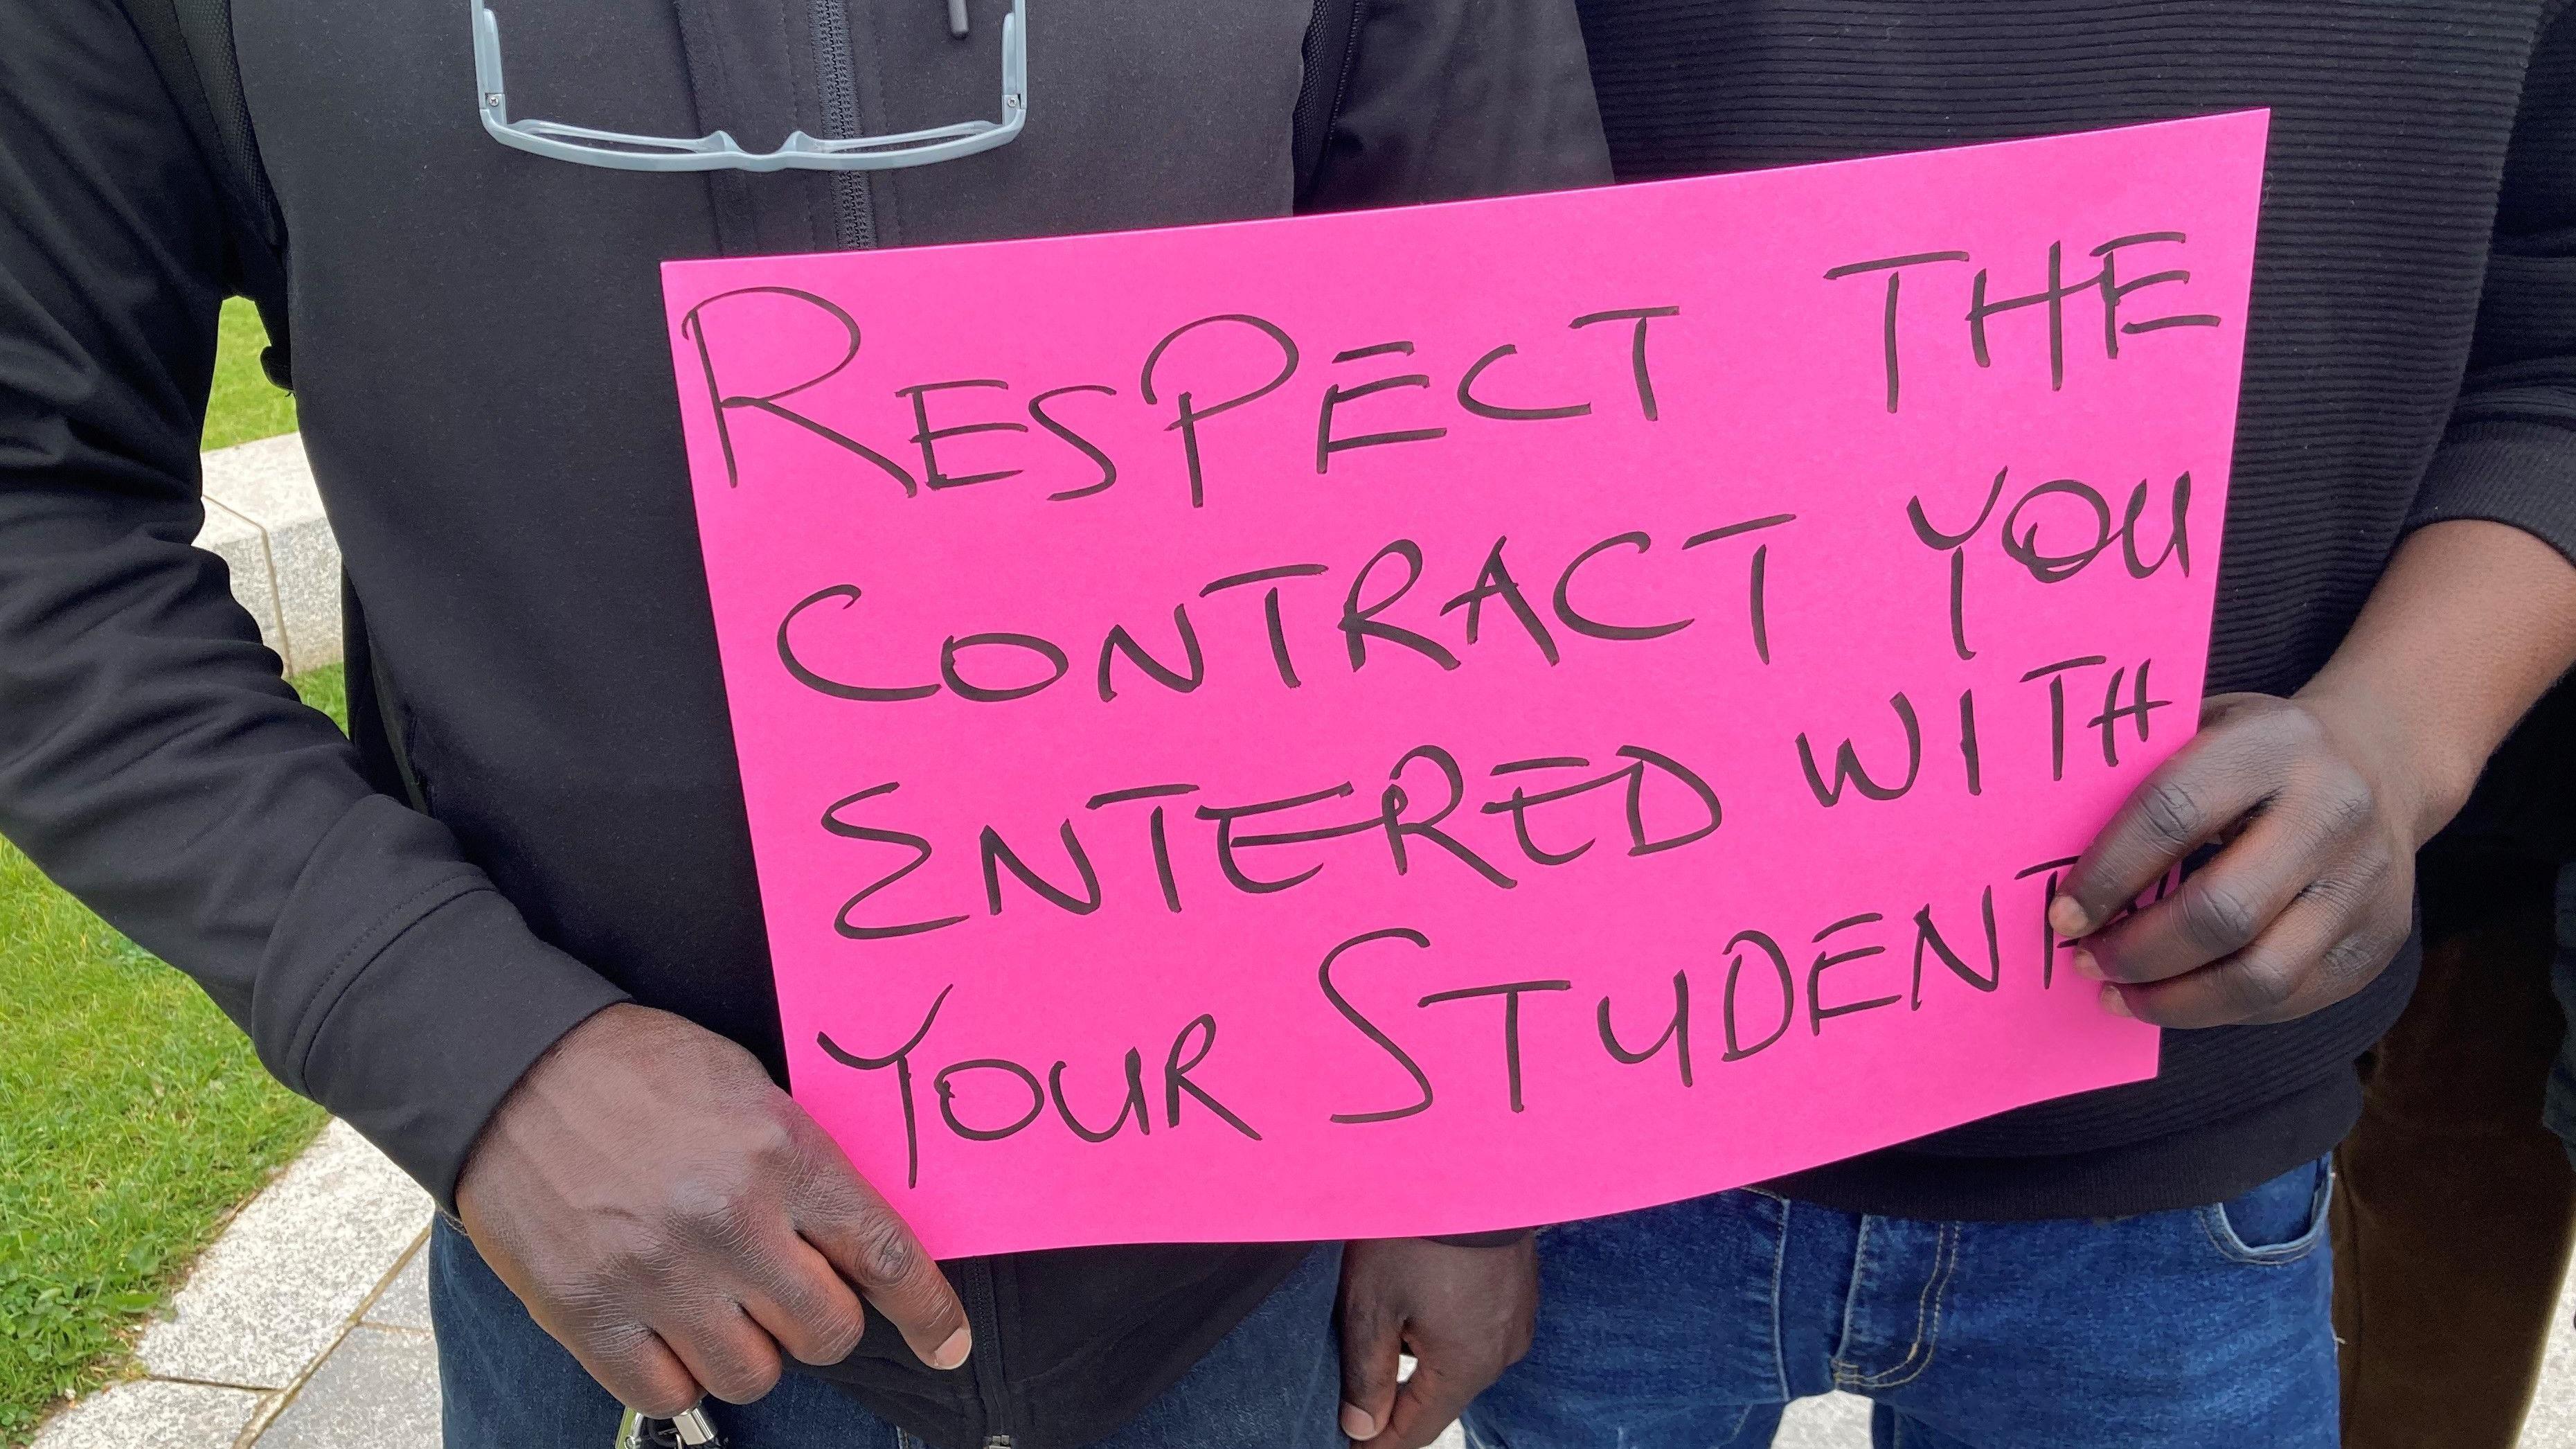 Students hold pink protest sign